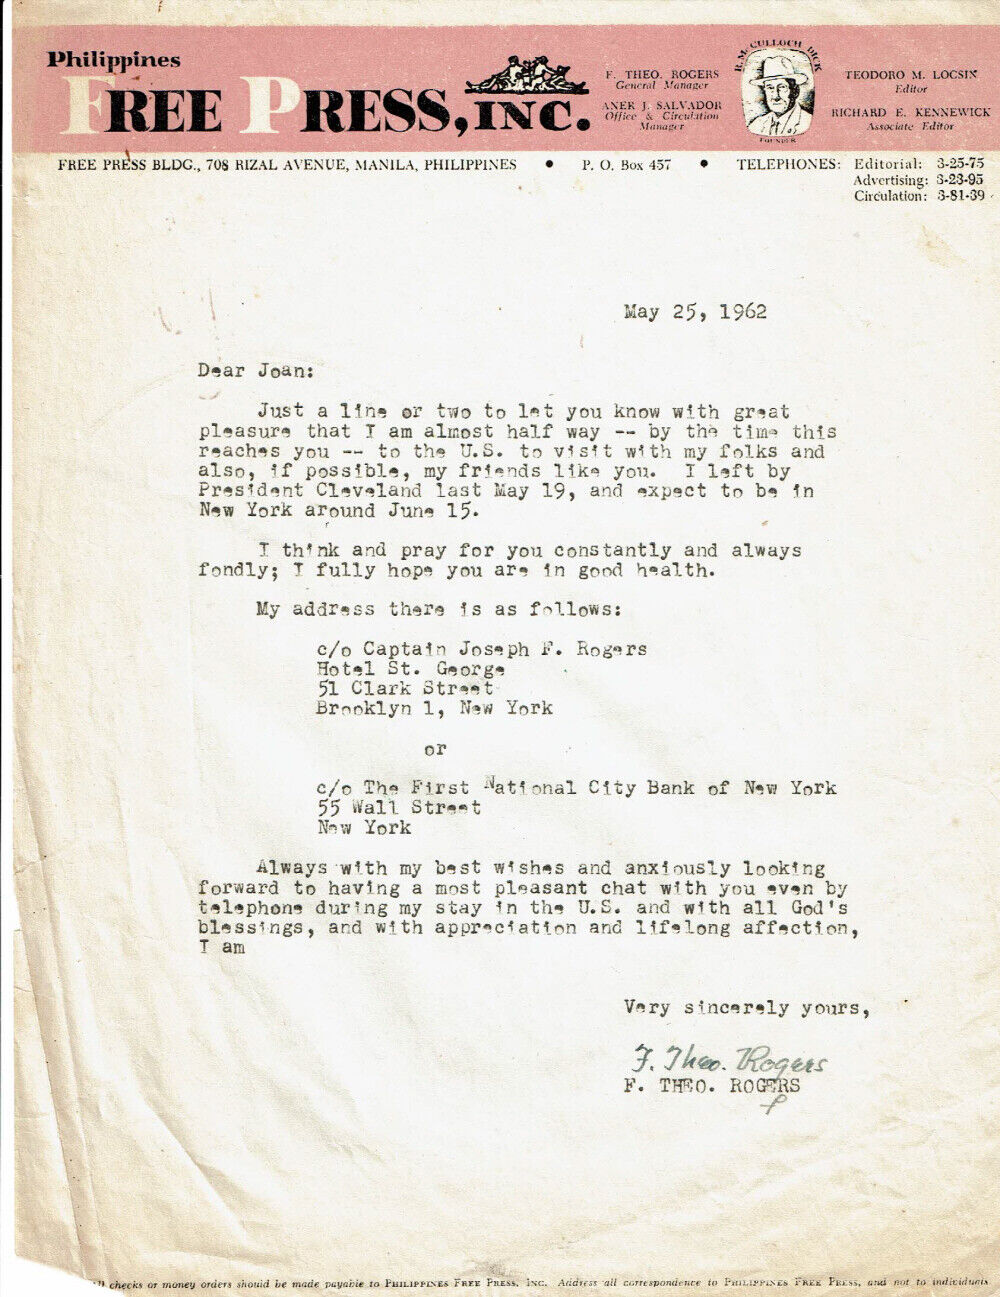 PHILIPPINES FREE PRESS mgr. F. THEO ROGERS 1962 SIGNED LETTER - Japanese POW